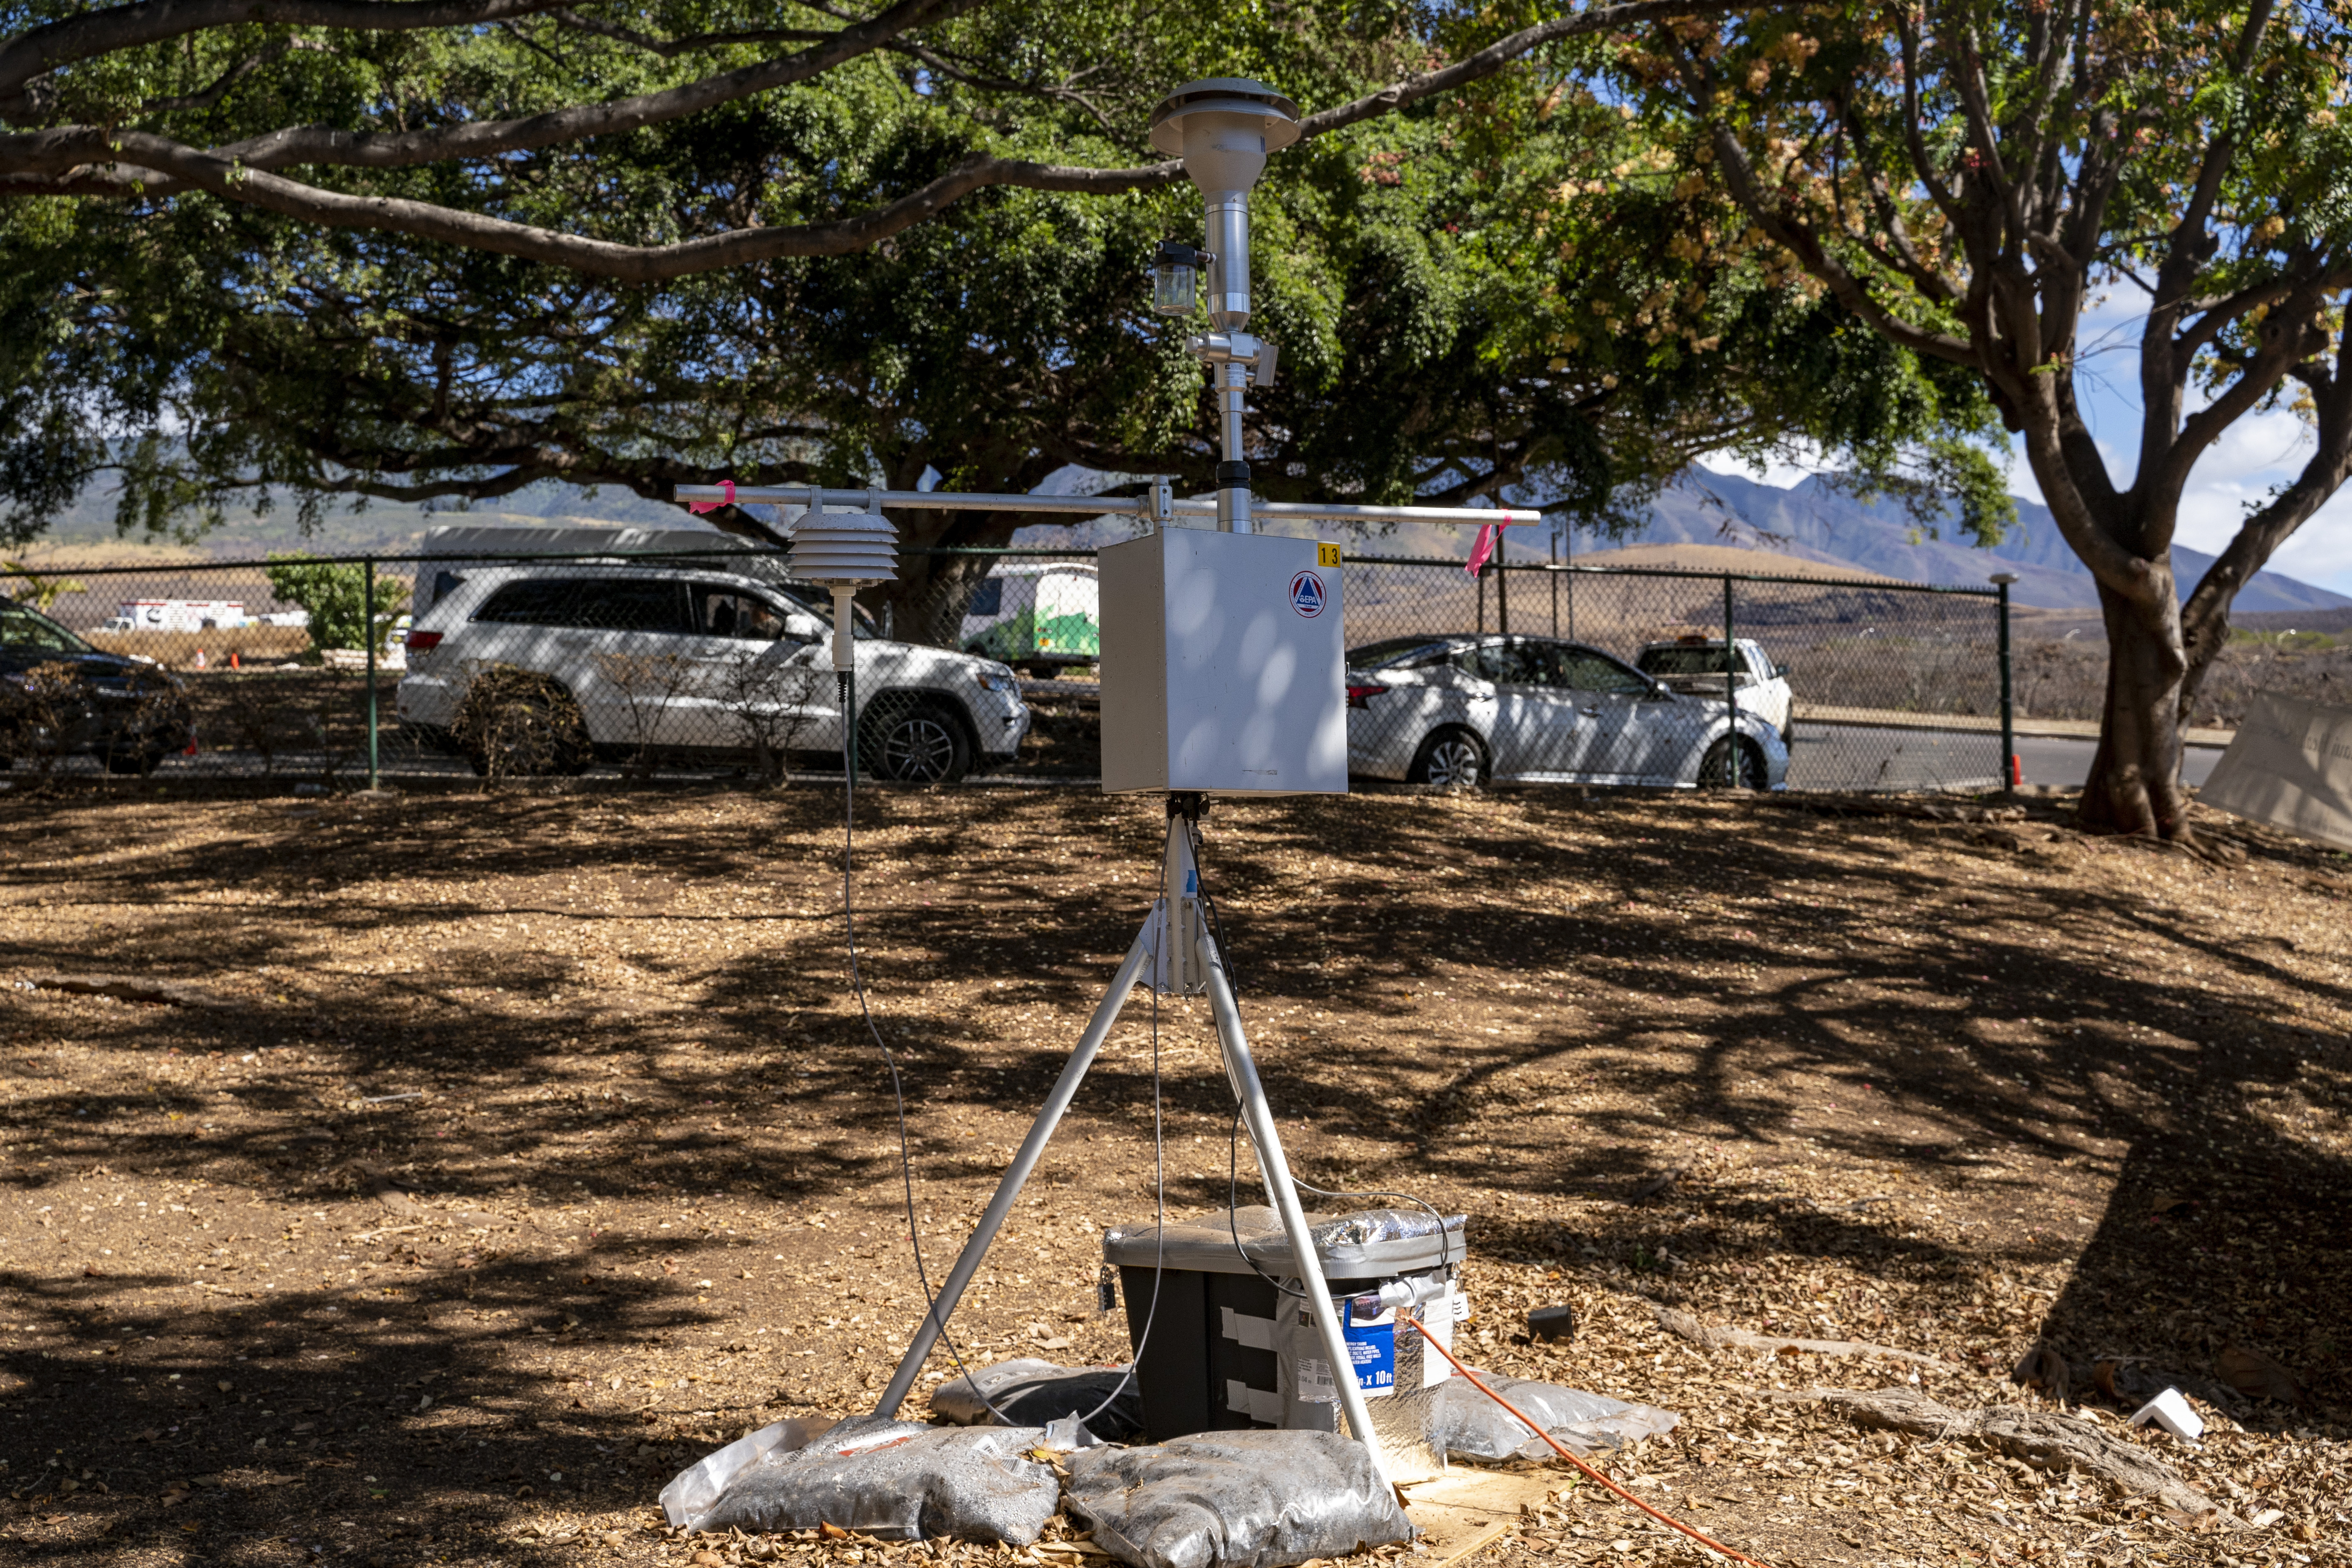 An air quality monitoring sensor is seen at Lahaina Comprehensive Health Center on Friday, Nov. 3, 2023, in Lahaina, Hawaii. Hawaii Department of Health and Environmental Protection Agency installed dozens of PM2.5 sensors in Lahaina and Upcountry Maui following the wildfire. (AP Photo/Mengshin Lin)